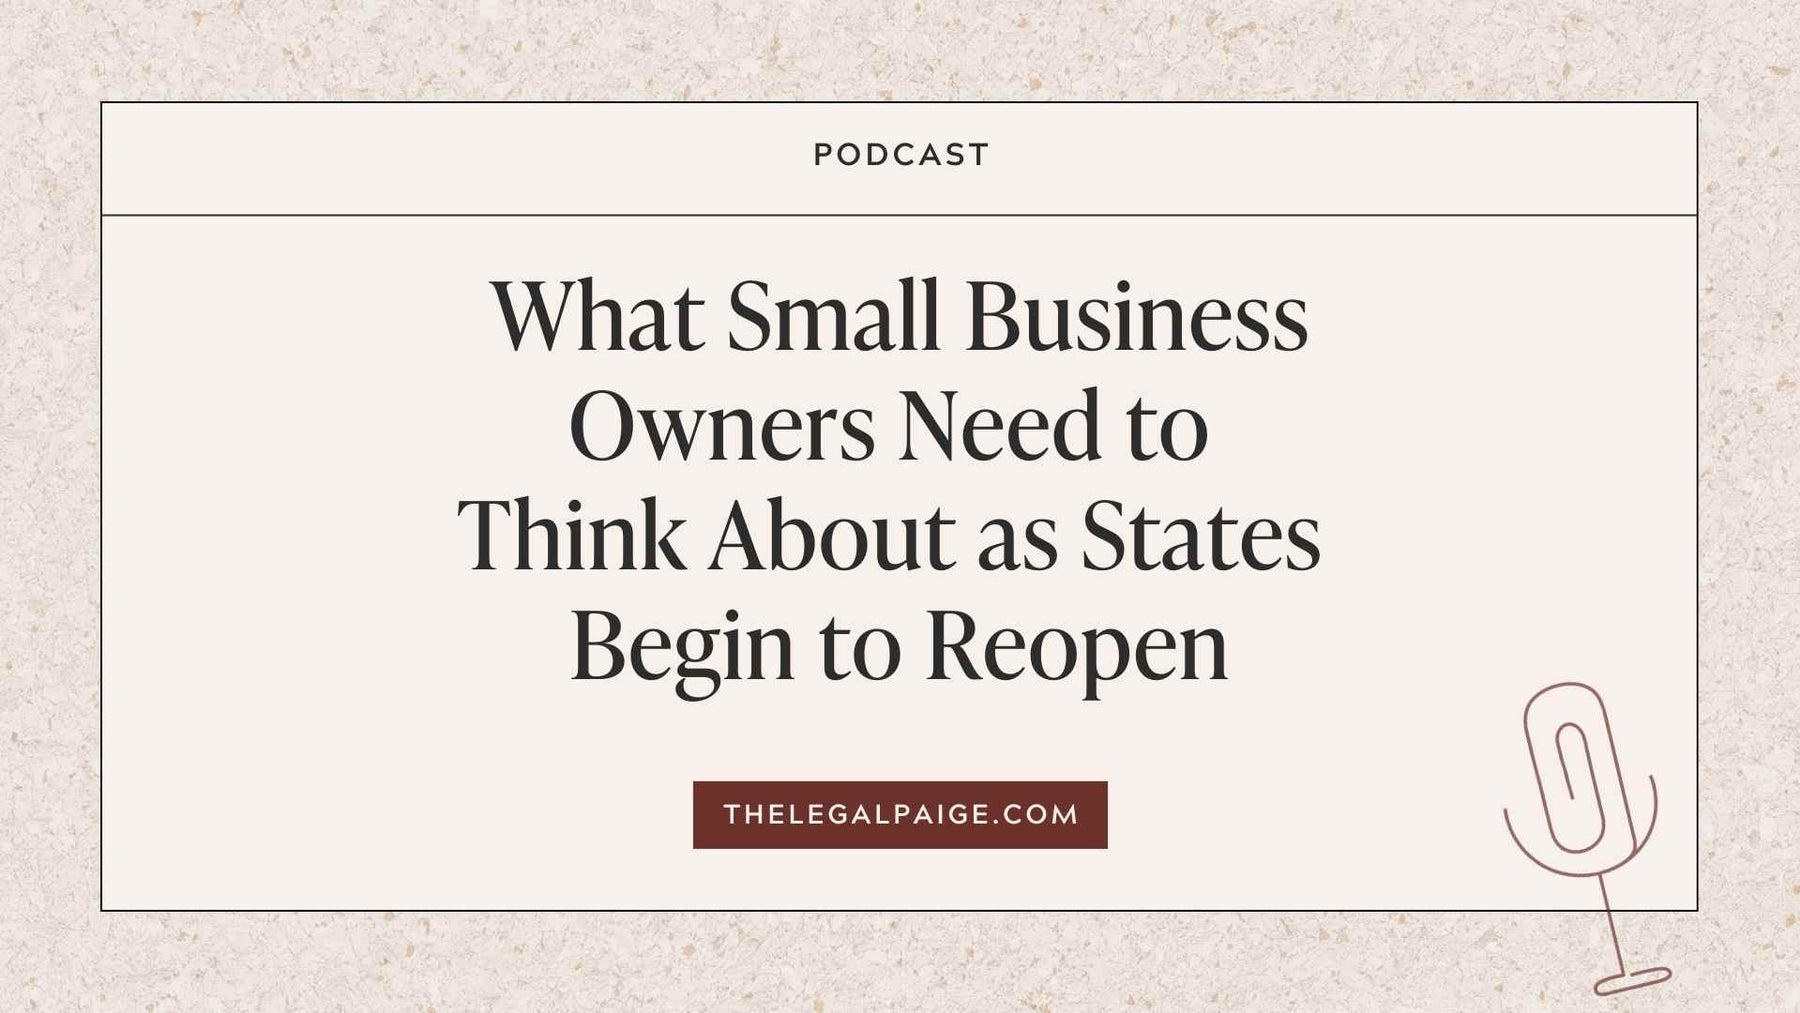 Episode 56:  What Small Business Owners Need to Think About as States Begin to Reopen